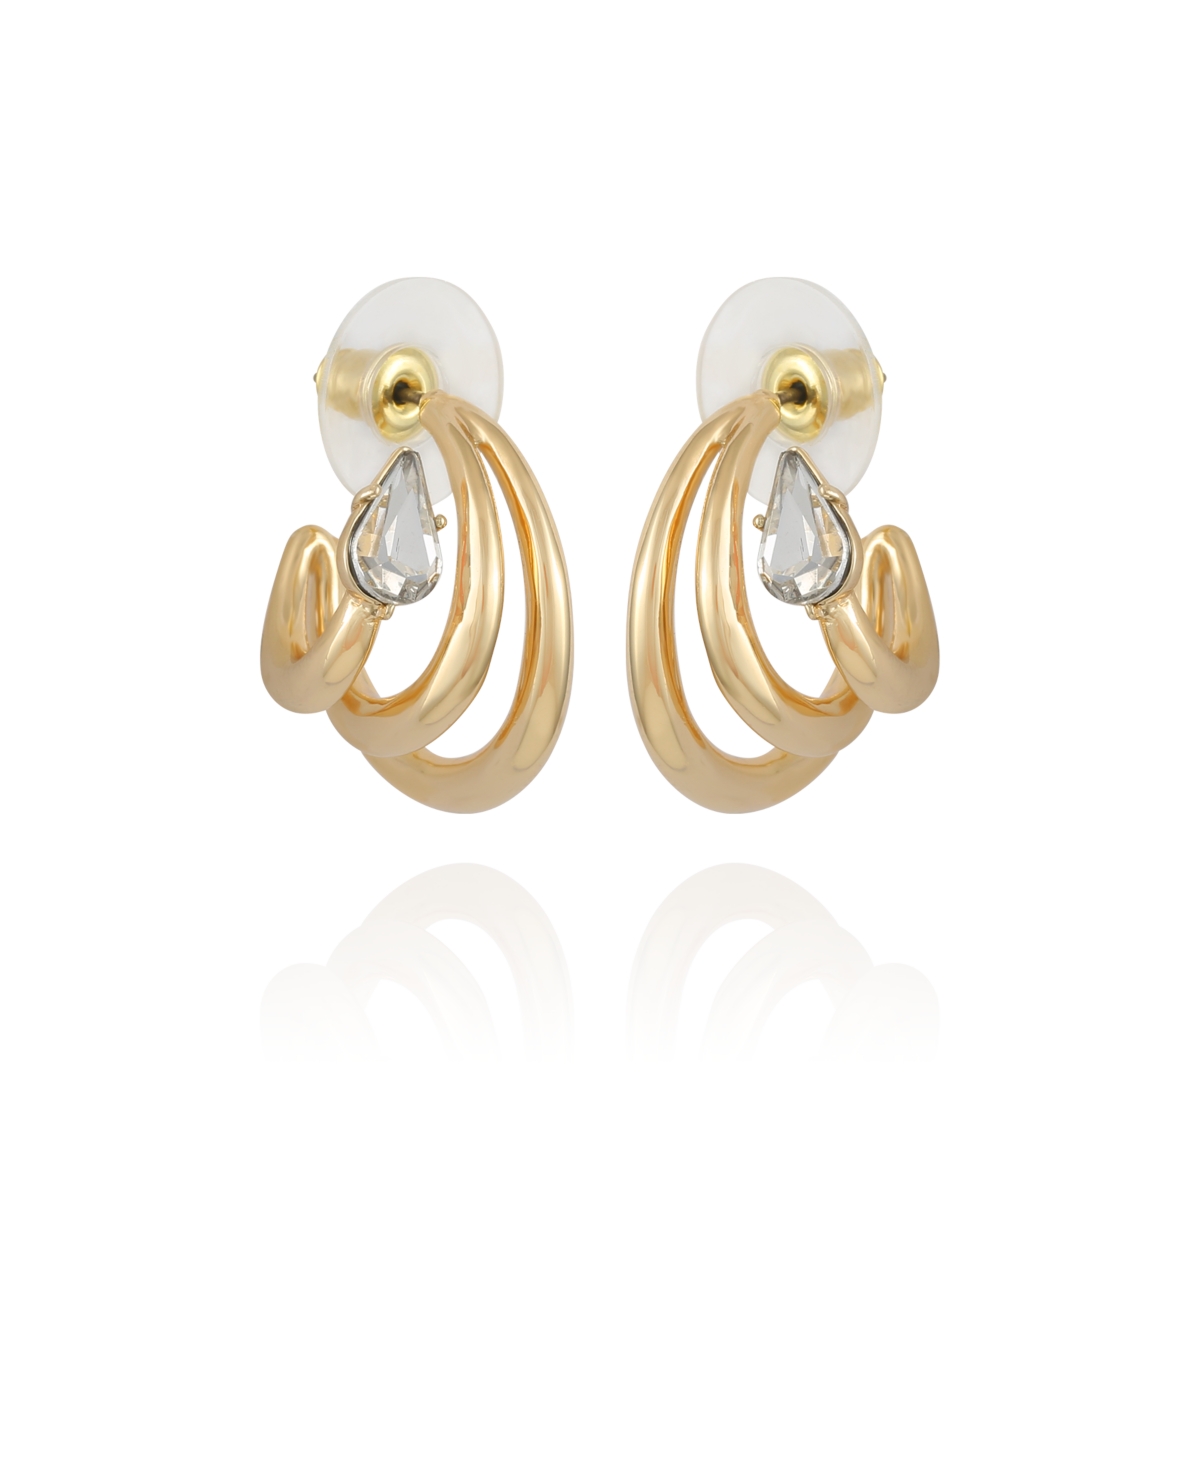 Gold-Tone and Crystal Small Hoop Earring with Stones - Gold-Tone, Crystal